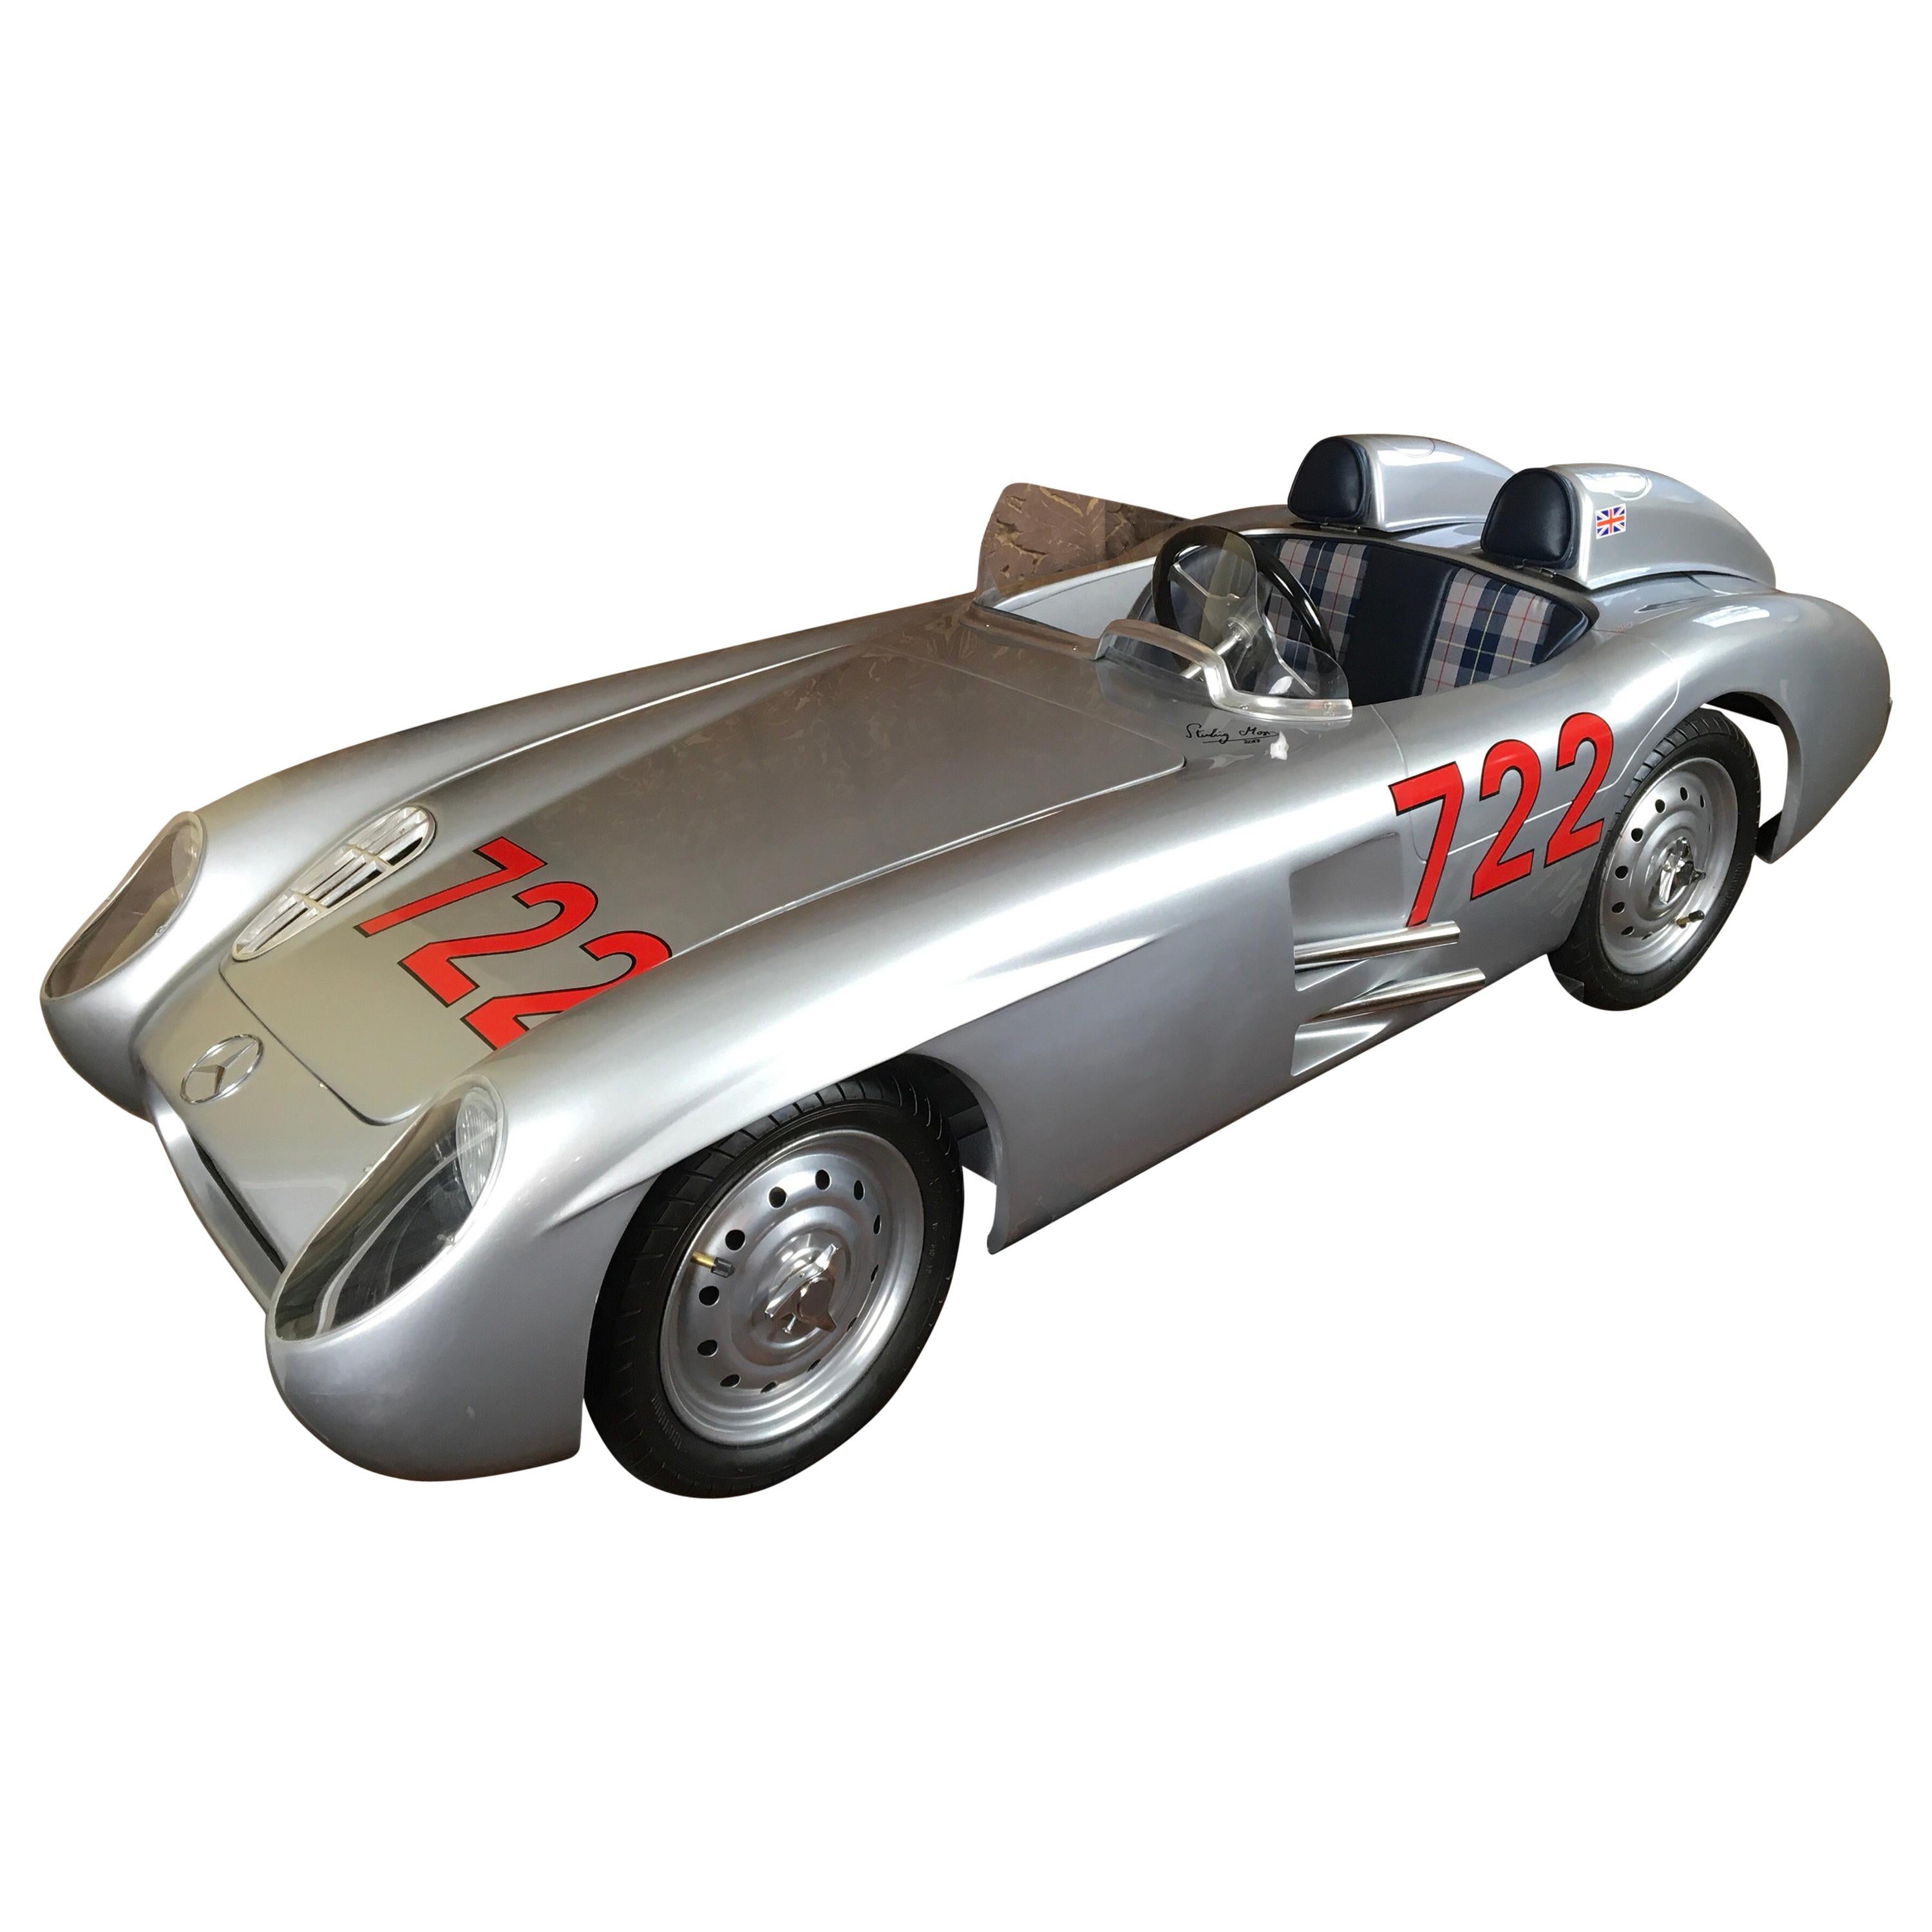 1/2 Scale Mercedes-Benz 300 SLR 722 Junior Car, Signed by Sir Stirling Moss 